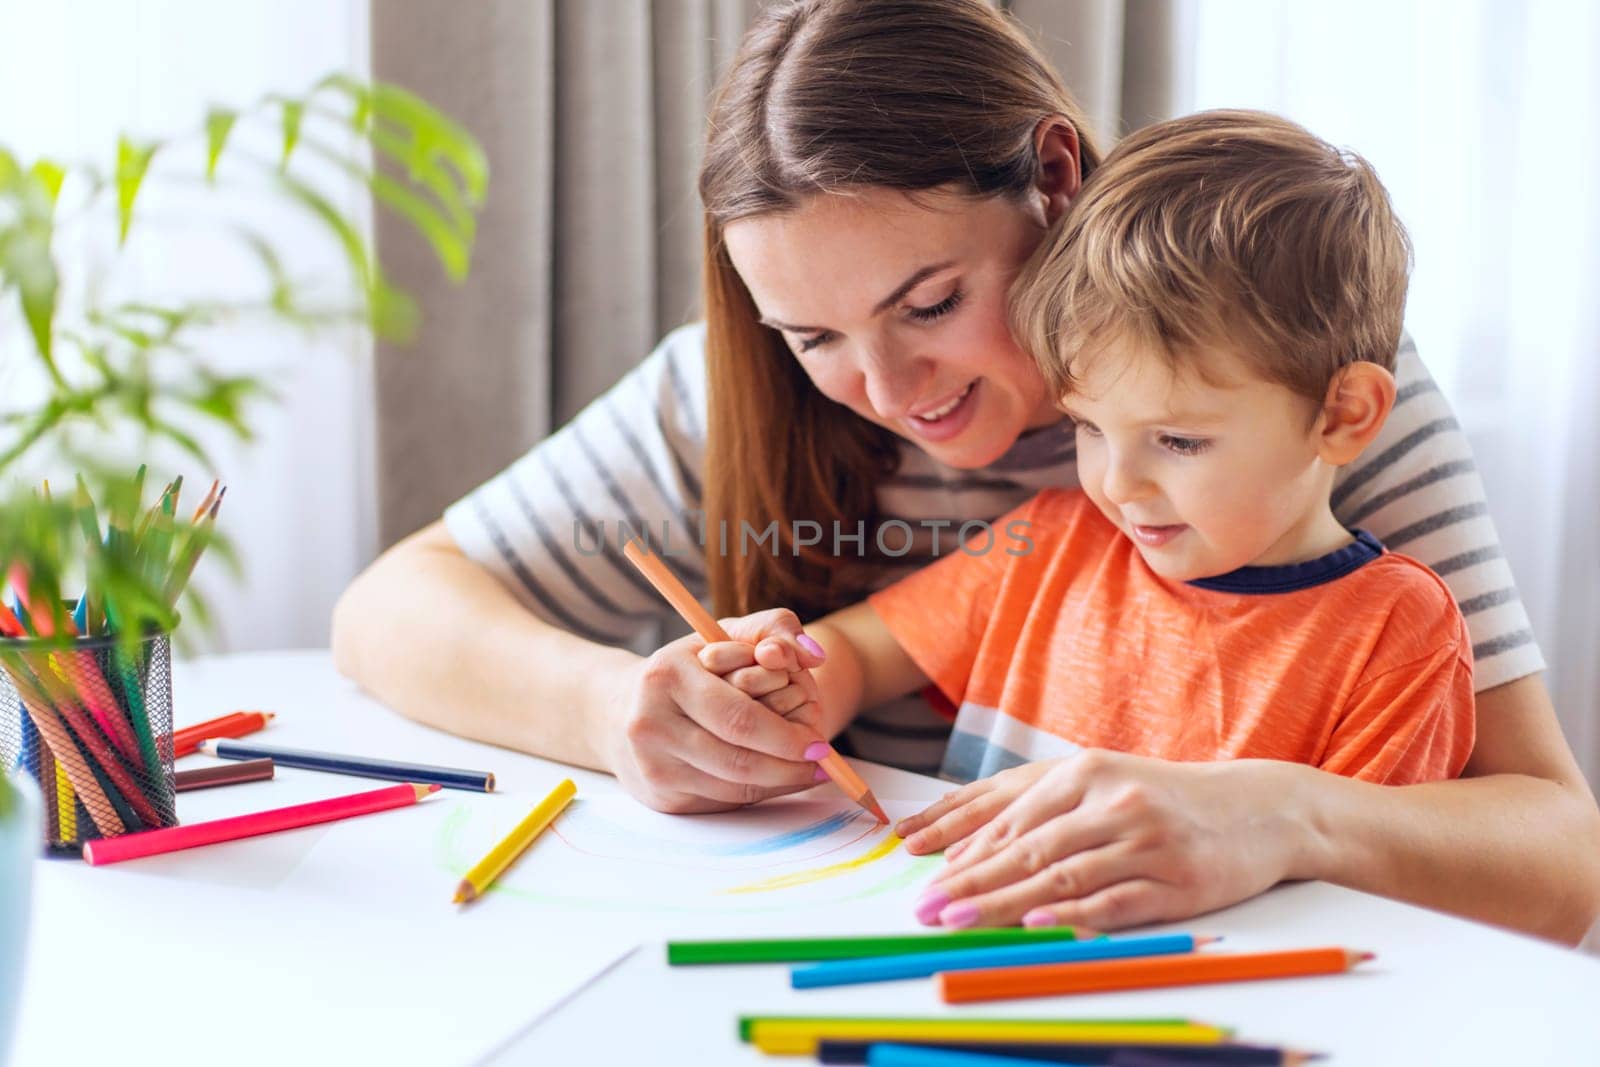 A caring mother guides her little boy in drawing with colorful pencils, creating a warm and educational home environment.